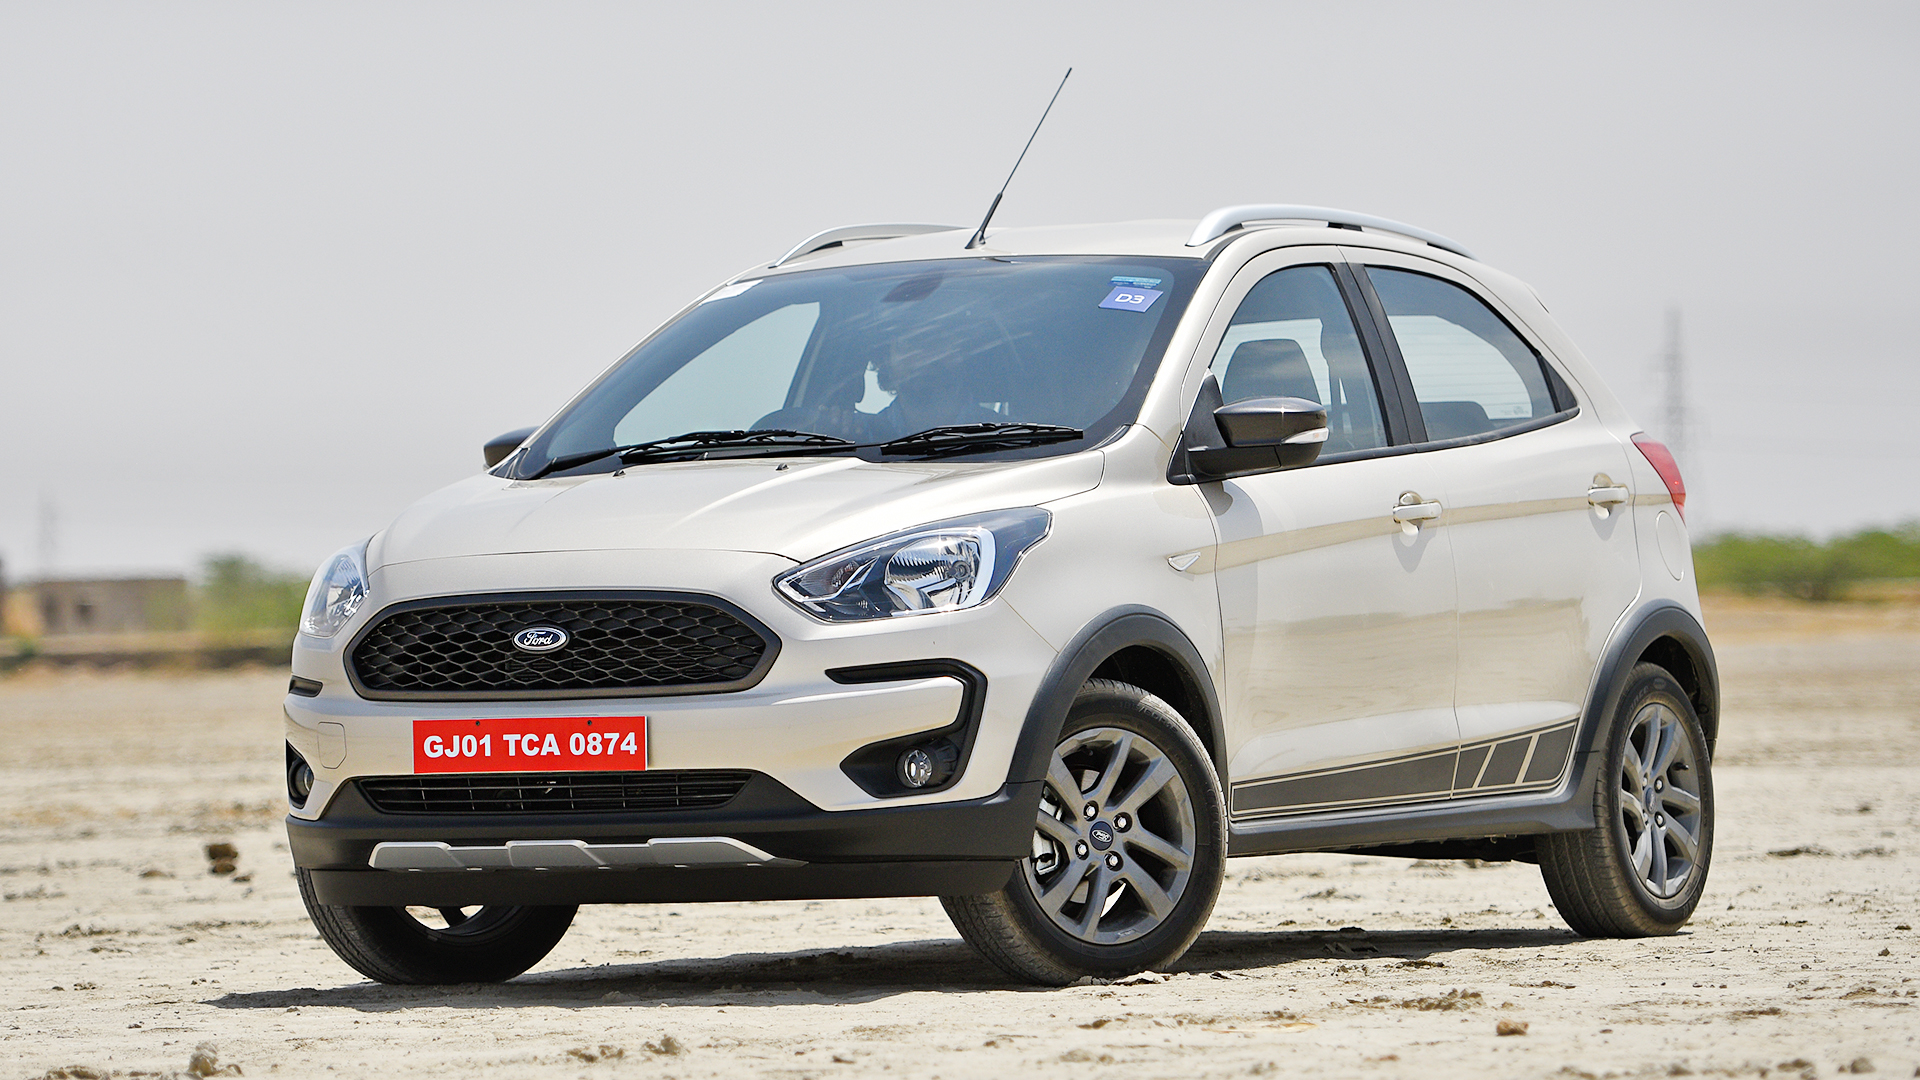 Ford Freestyle 2020 1.5 Diesel Titanium Plus - Price in India, Mileage,  Reviews, Colours, Specification, Images - Overdrive